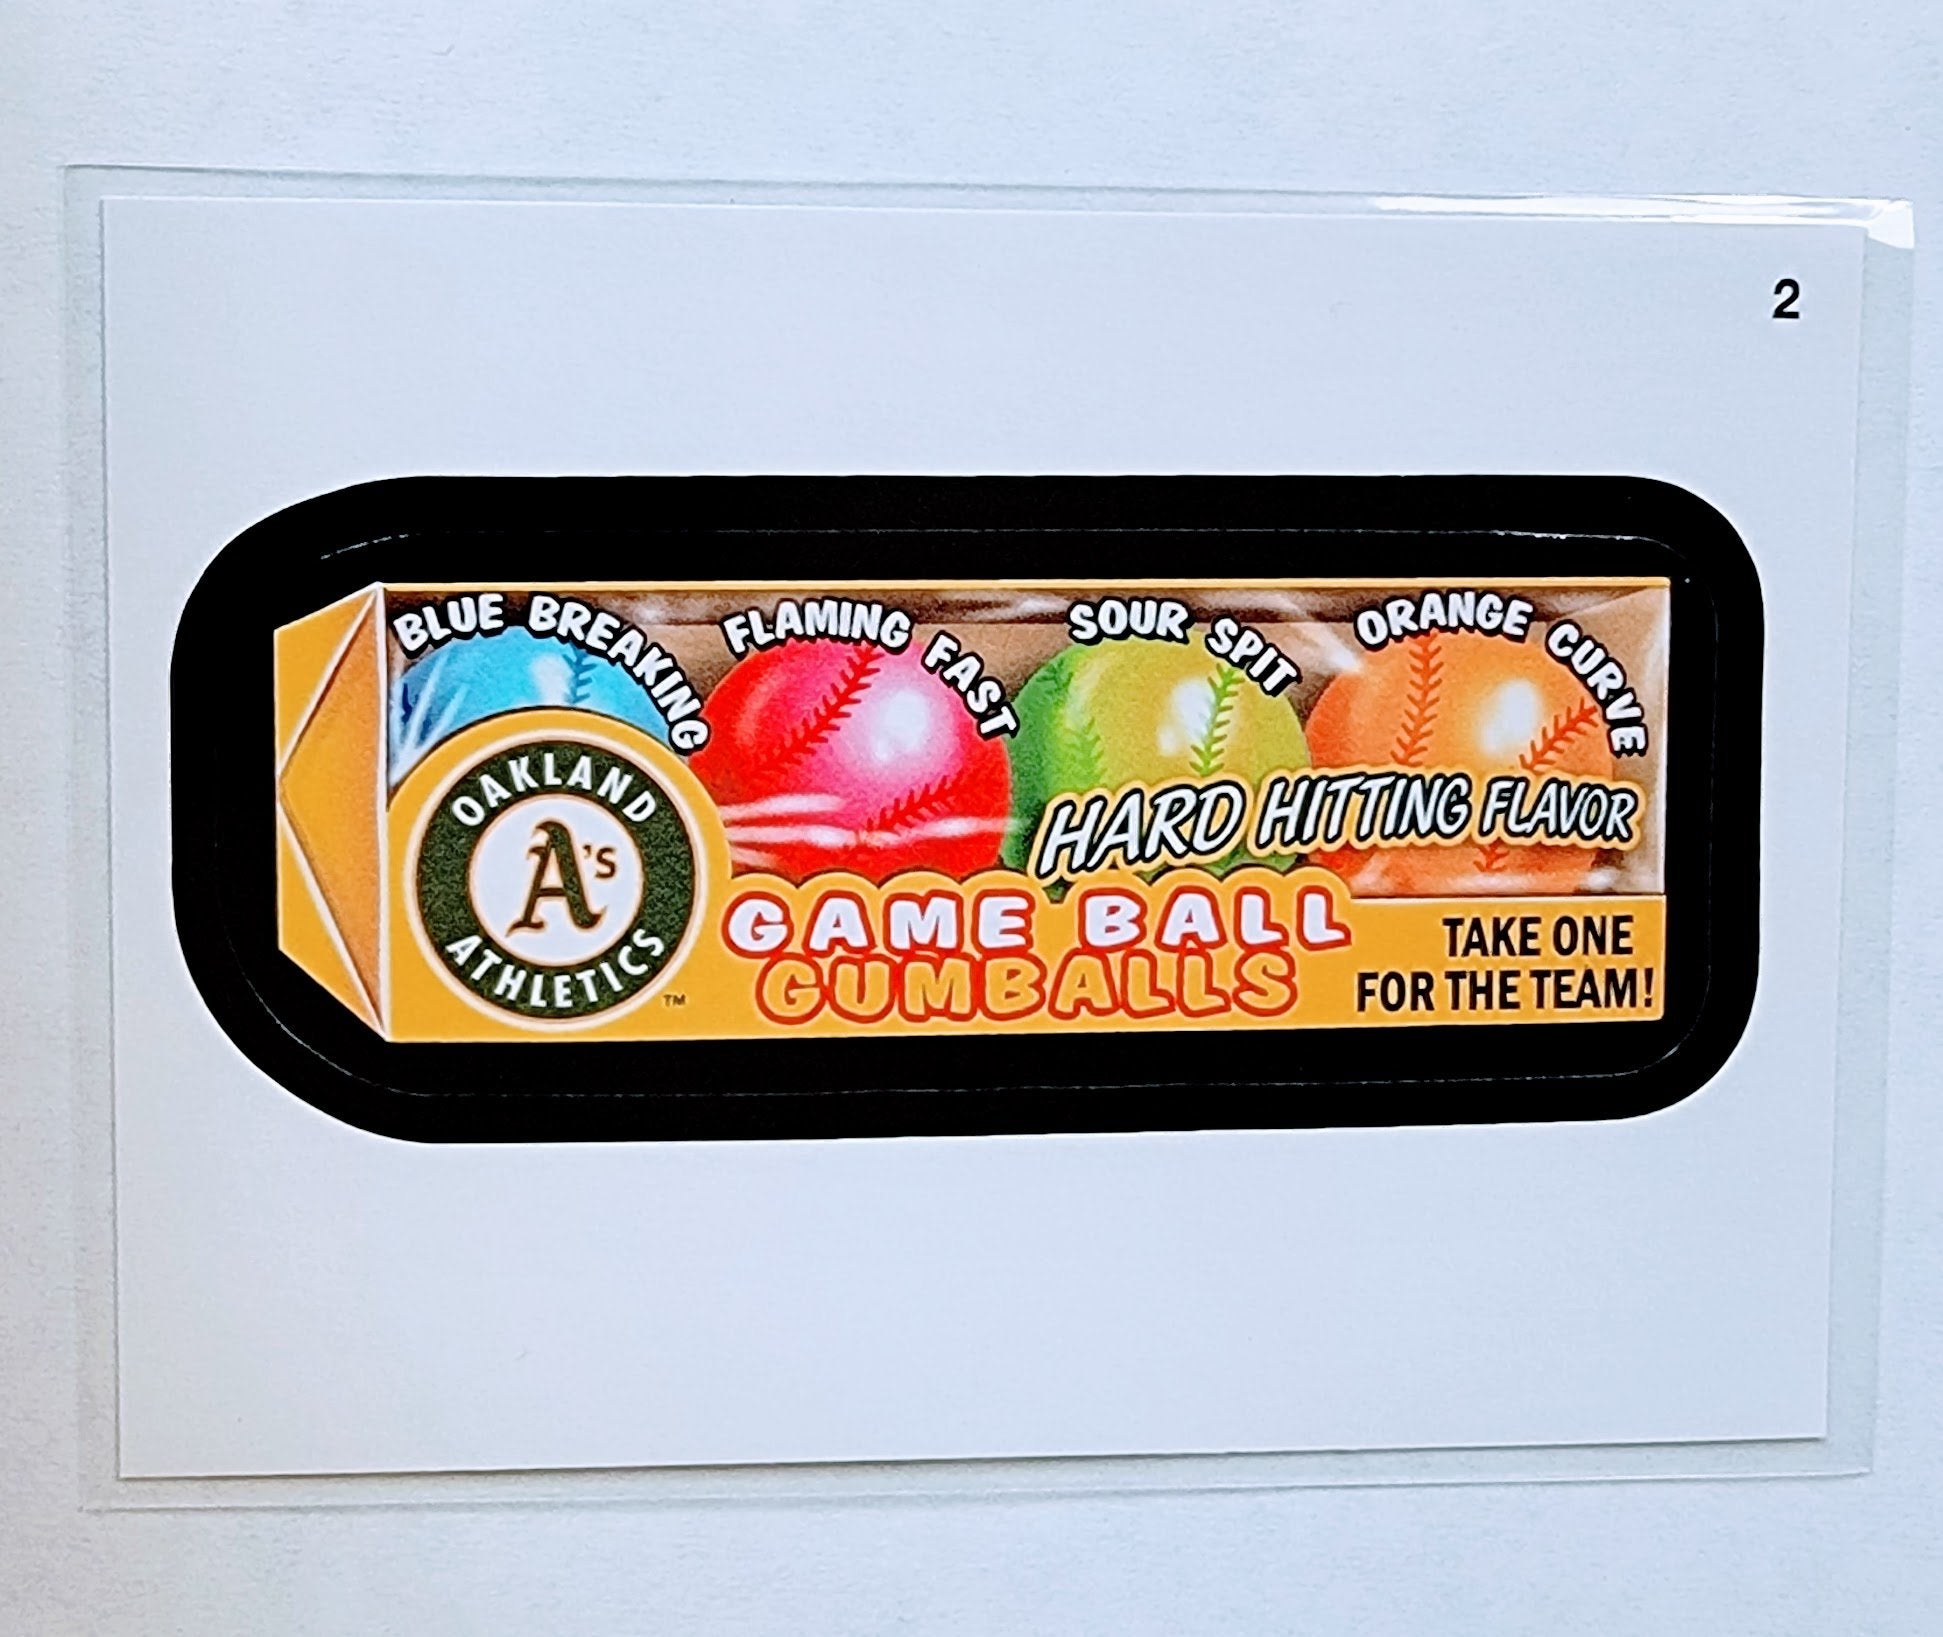 2016 Topps MLB Baseball Wacky Packages Oakland Athletics Game Ball Gumballs Parallel Sticker Trading Card MCSC1 simple Xclusive Collectibles   